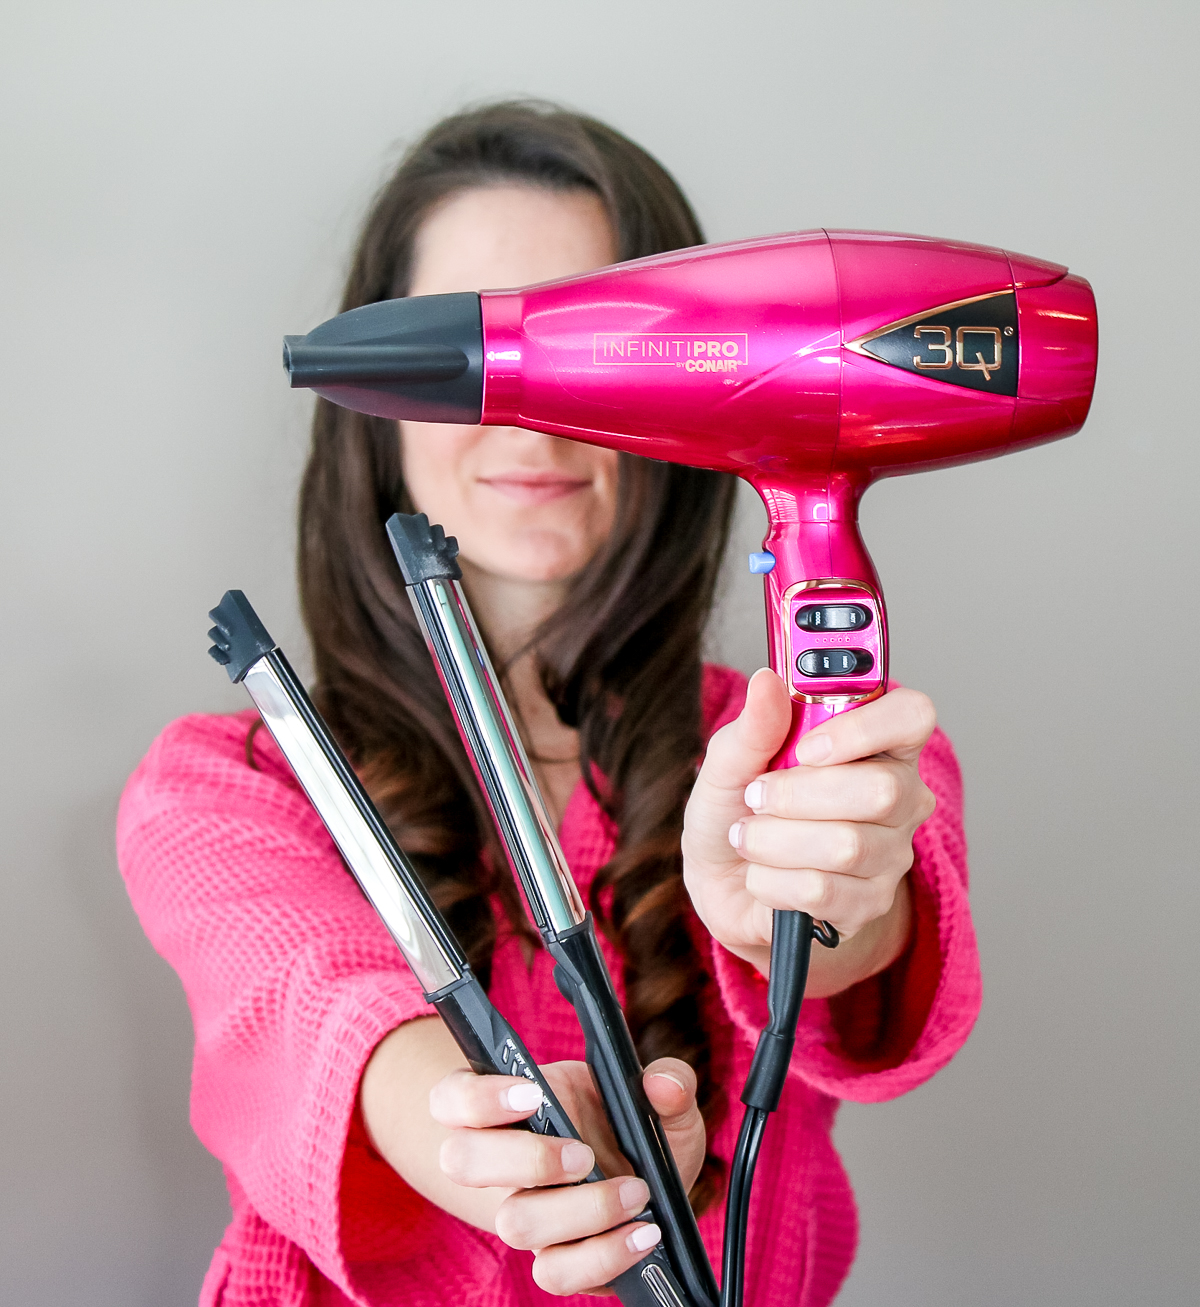 Conair 3Q blow dryer and Conair 2-in-1 styler review | How to use the InfinitiPRO by Conair 2-in-1 Styler | How to use the InfinitiPRO by Conair 3Q Compact Styler | The best blow dryer for thick coarse hair and best 2-in-1 styler from Conair | Conair's best hair styling tools for women | The Countdown to Styling: 2 Conair Styling tools Every Girl Needs to Try by blogger and retired beauty queen Stephanie Ziajka from Diary of a Debutante